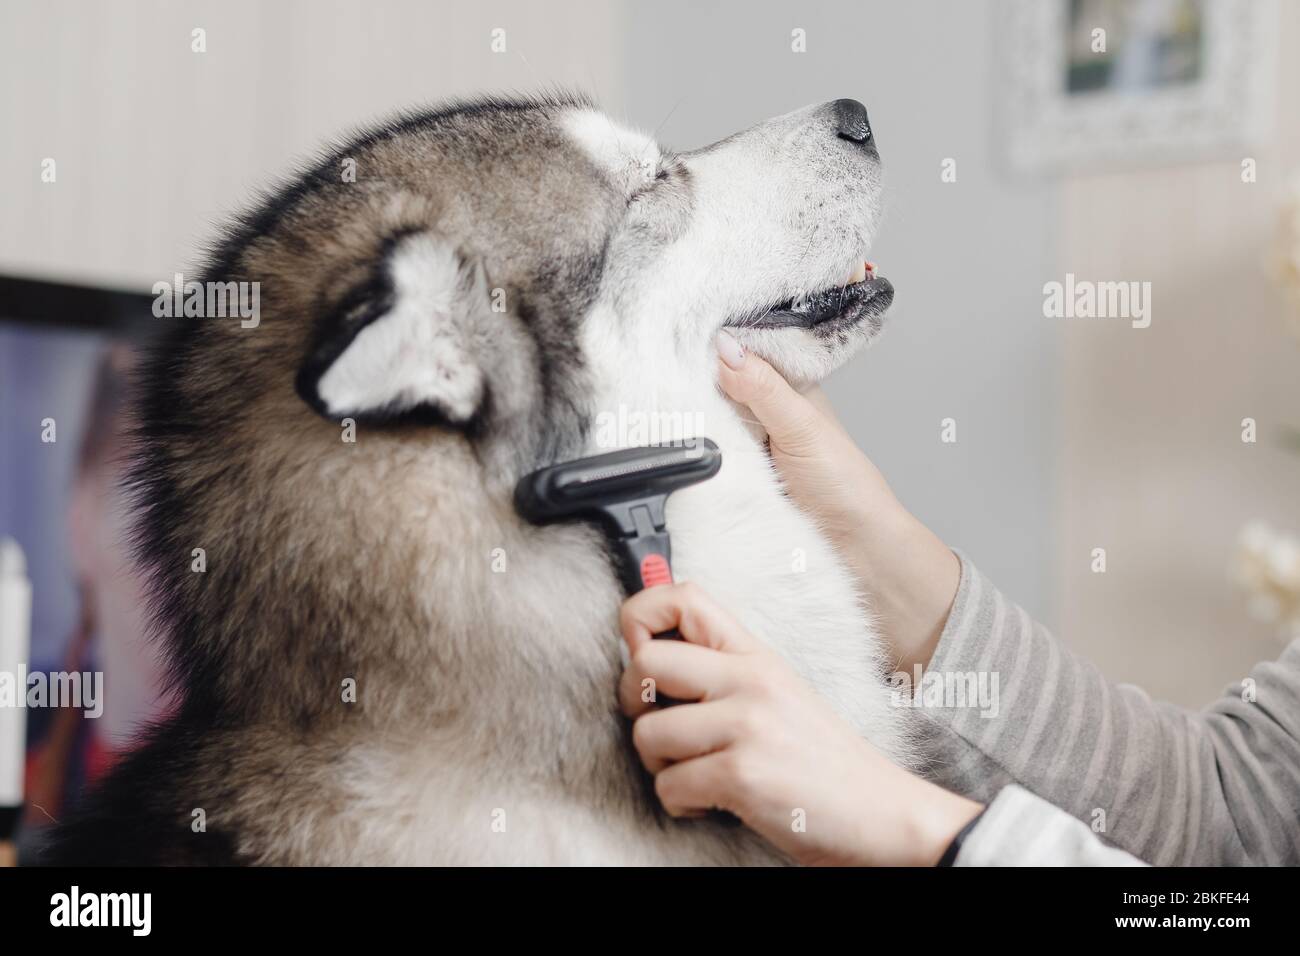 Dog is sitting sideways with her eyes closed, woman cleaning wool. Stock Photo